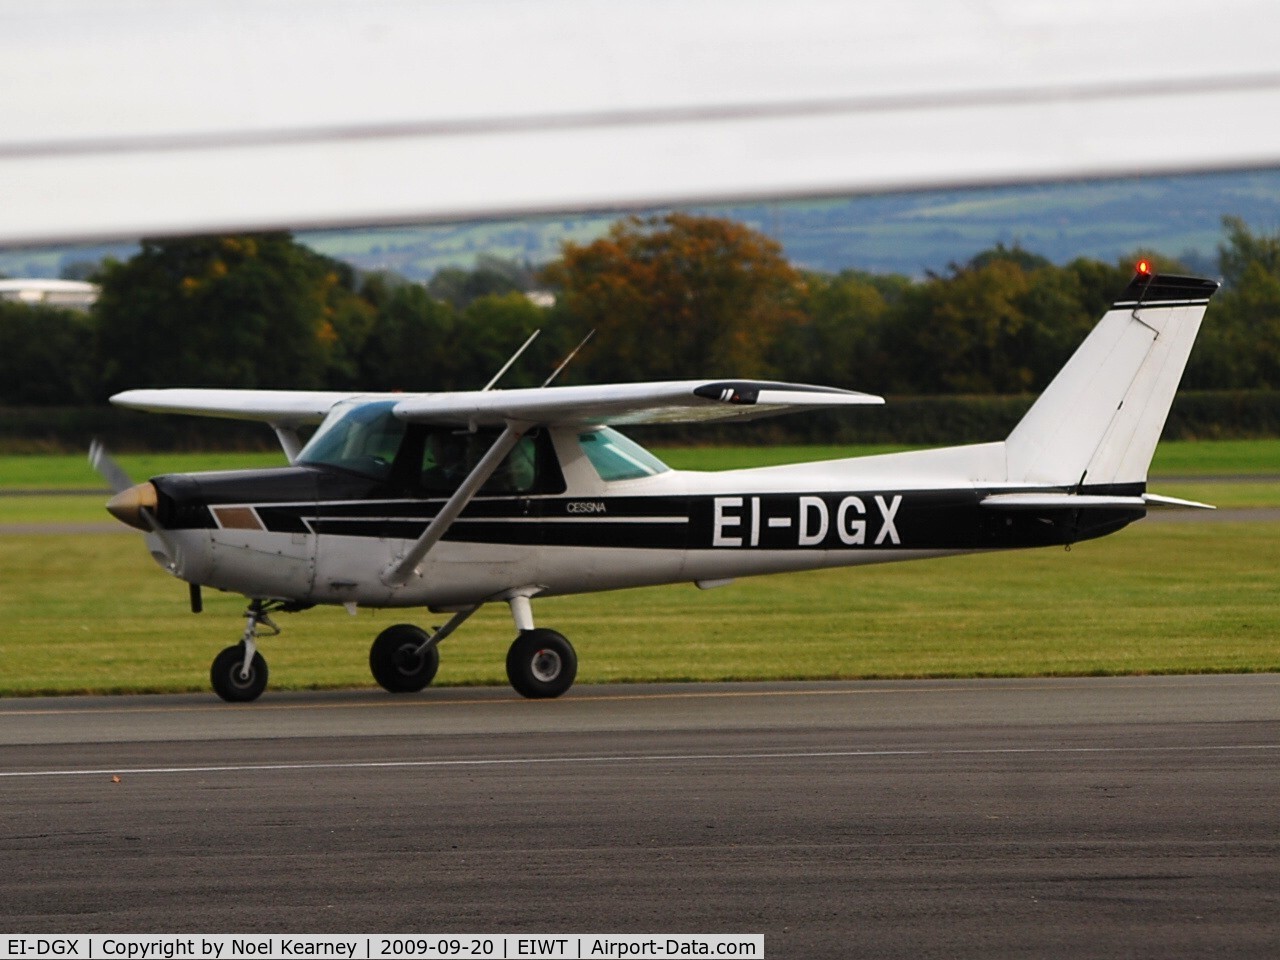 EI-DGX, 1978 Cessna 152 C/N 152-81296, Taxi-ing back to the ramp after a flying lesson.